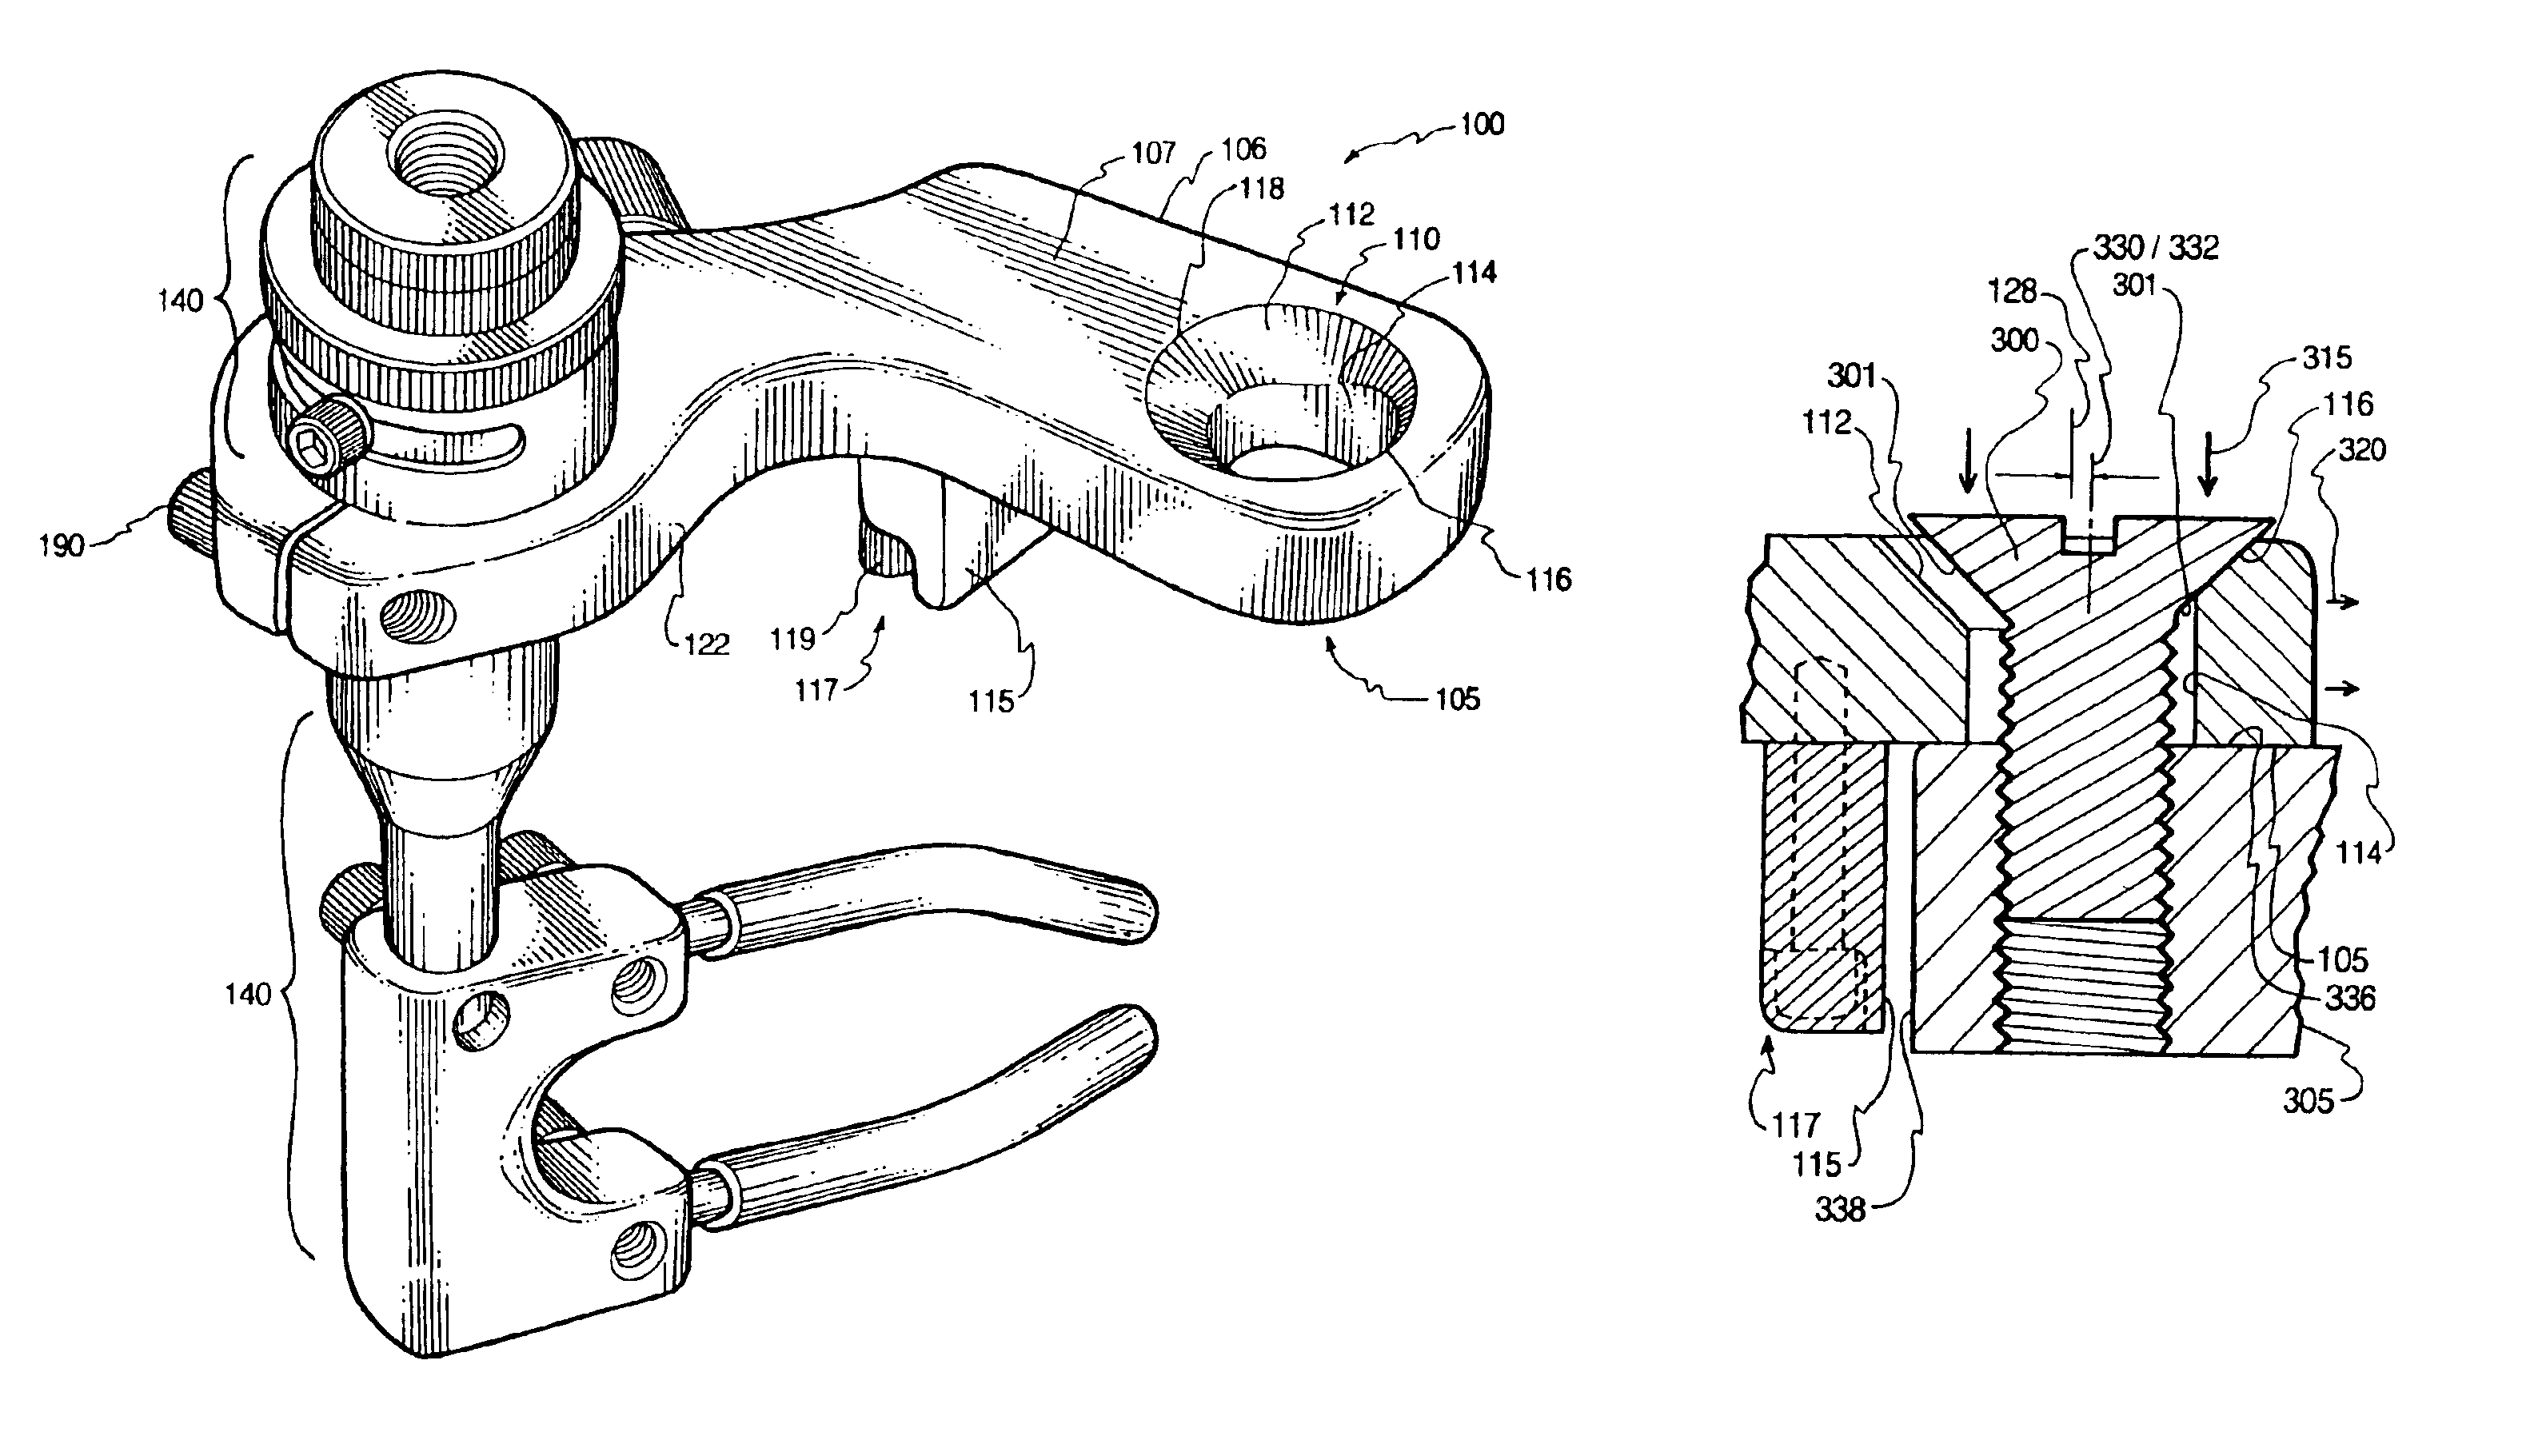 Archery bow accessory mounting system and method